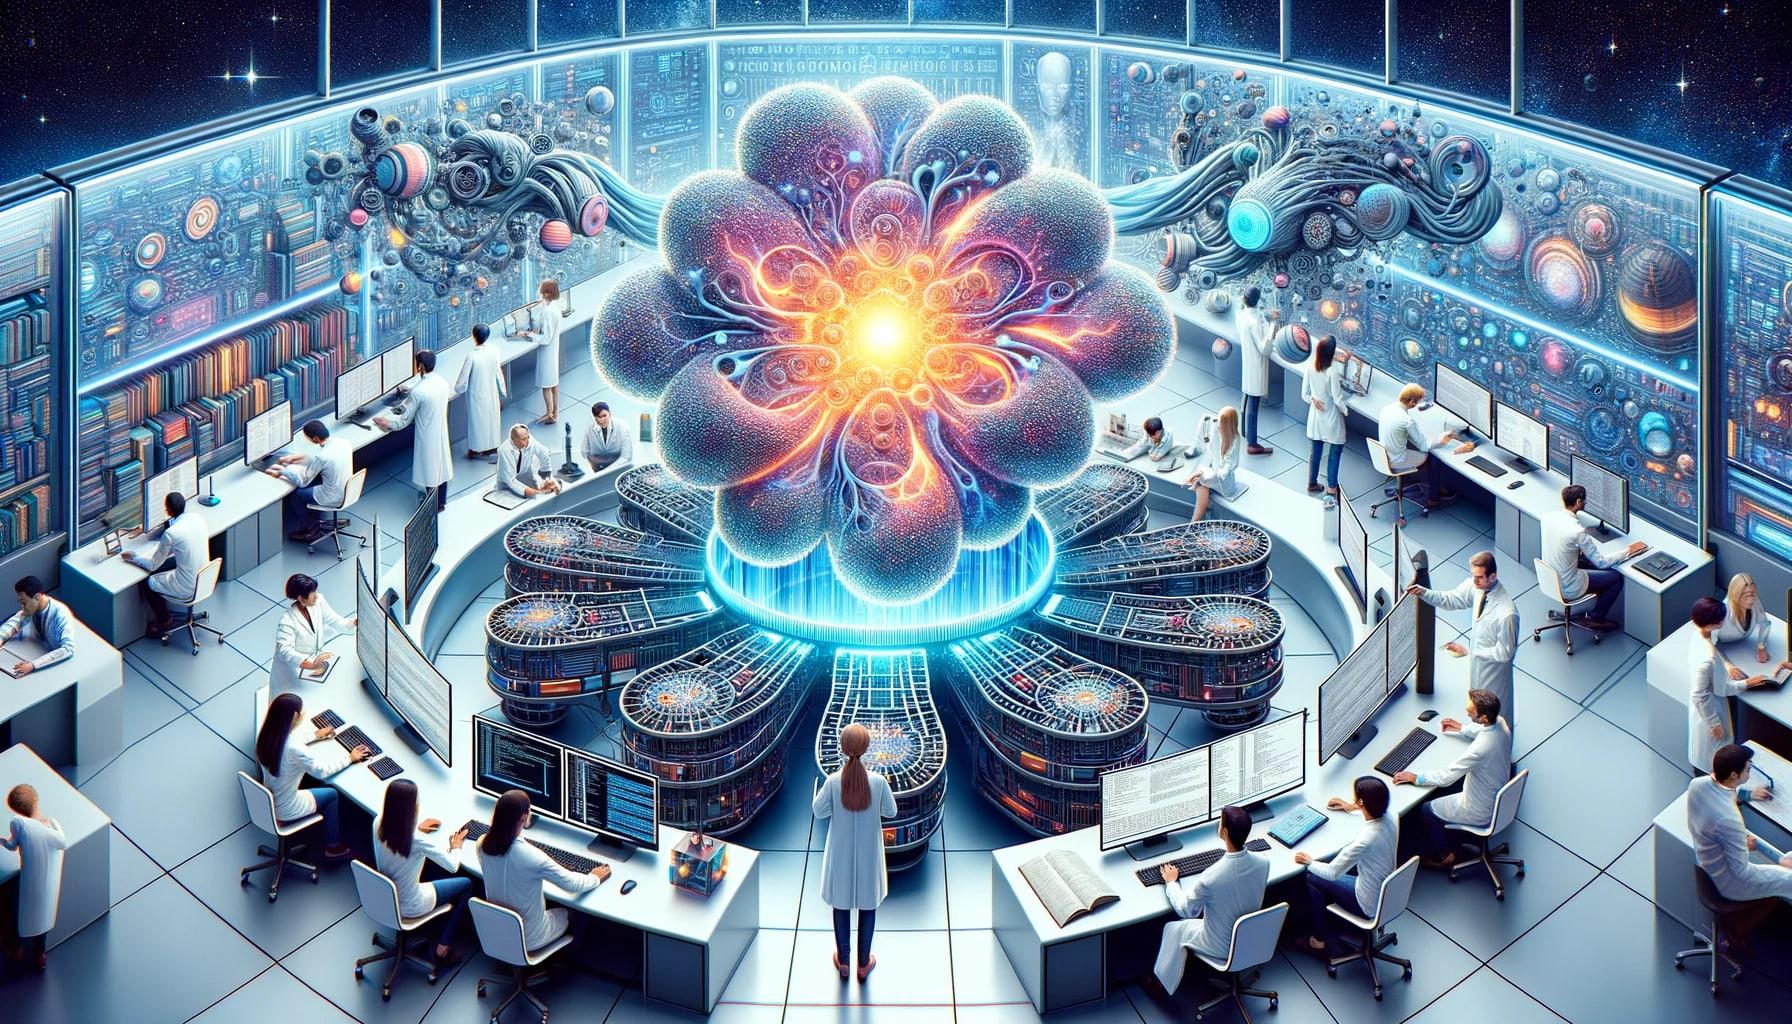 Illustration set in a futuristic knowledge lab where the potential of Large Language Models in Knowledge Engineering is explored. The central focus is a hybrid system where the LLM, depicted as a radiant neural cloud, intertwines with symbolic logic chains. Around this central system, researchers of diverse genders and descents are engaged in various tasks, from programming to analyzing the data, showcasing the evolution of Knowledge Engineering in the age of neuro-symbolic integration.